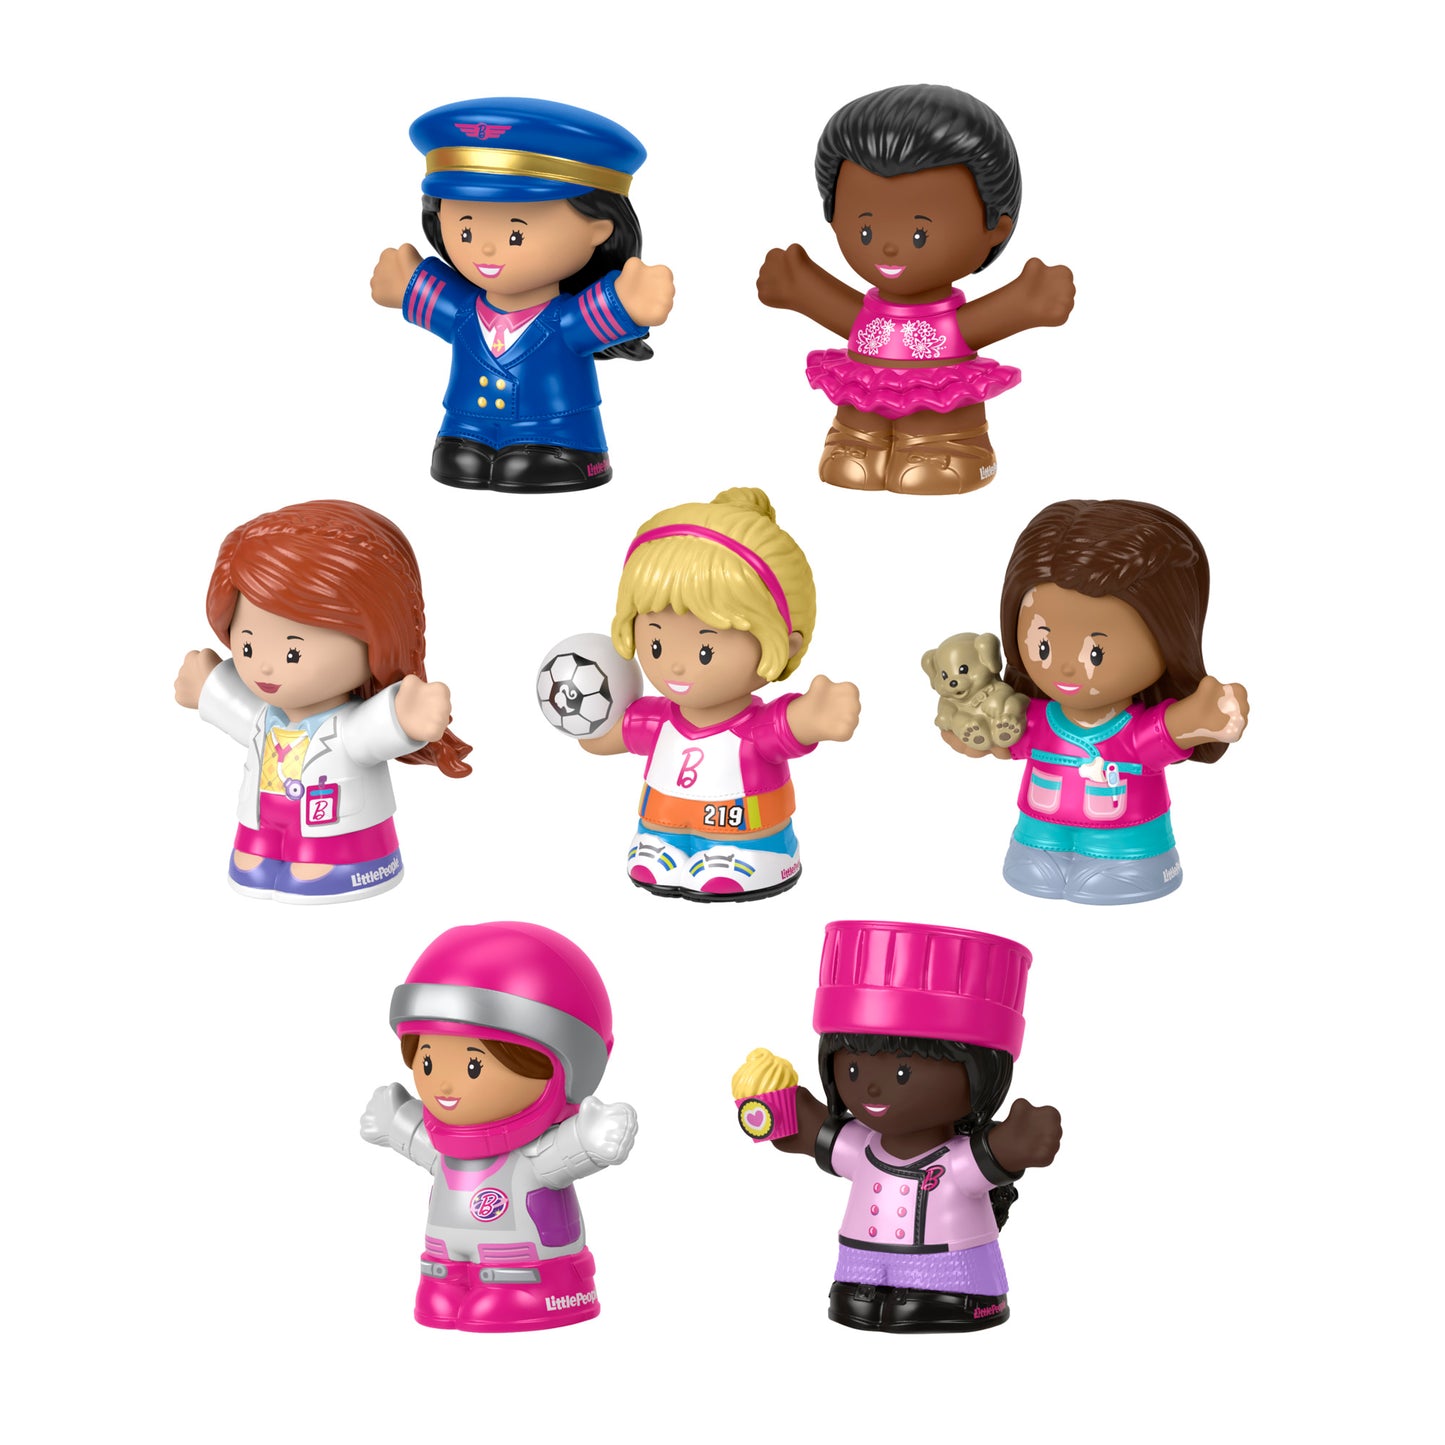 Barbie You Can Be Anything Figure Pack by Little People